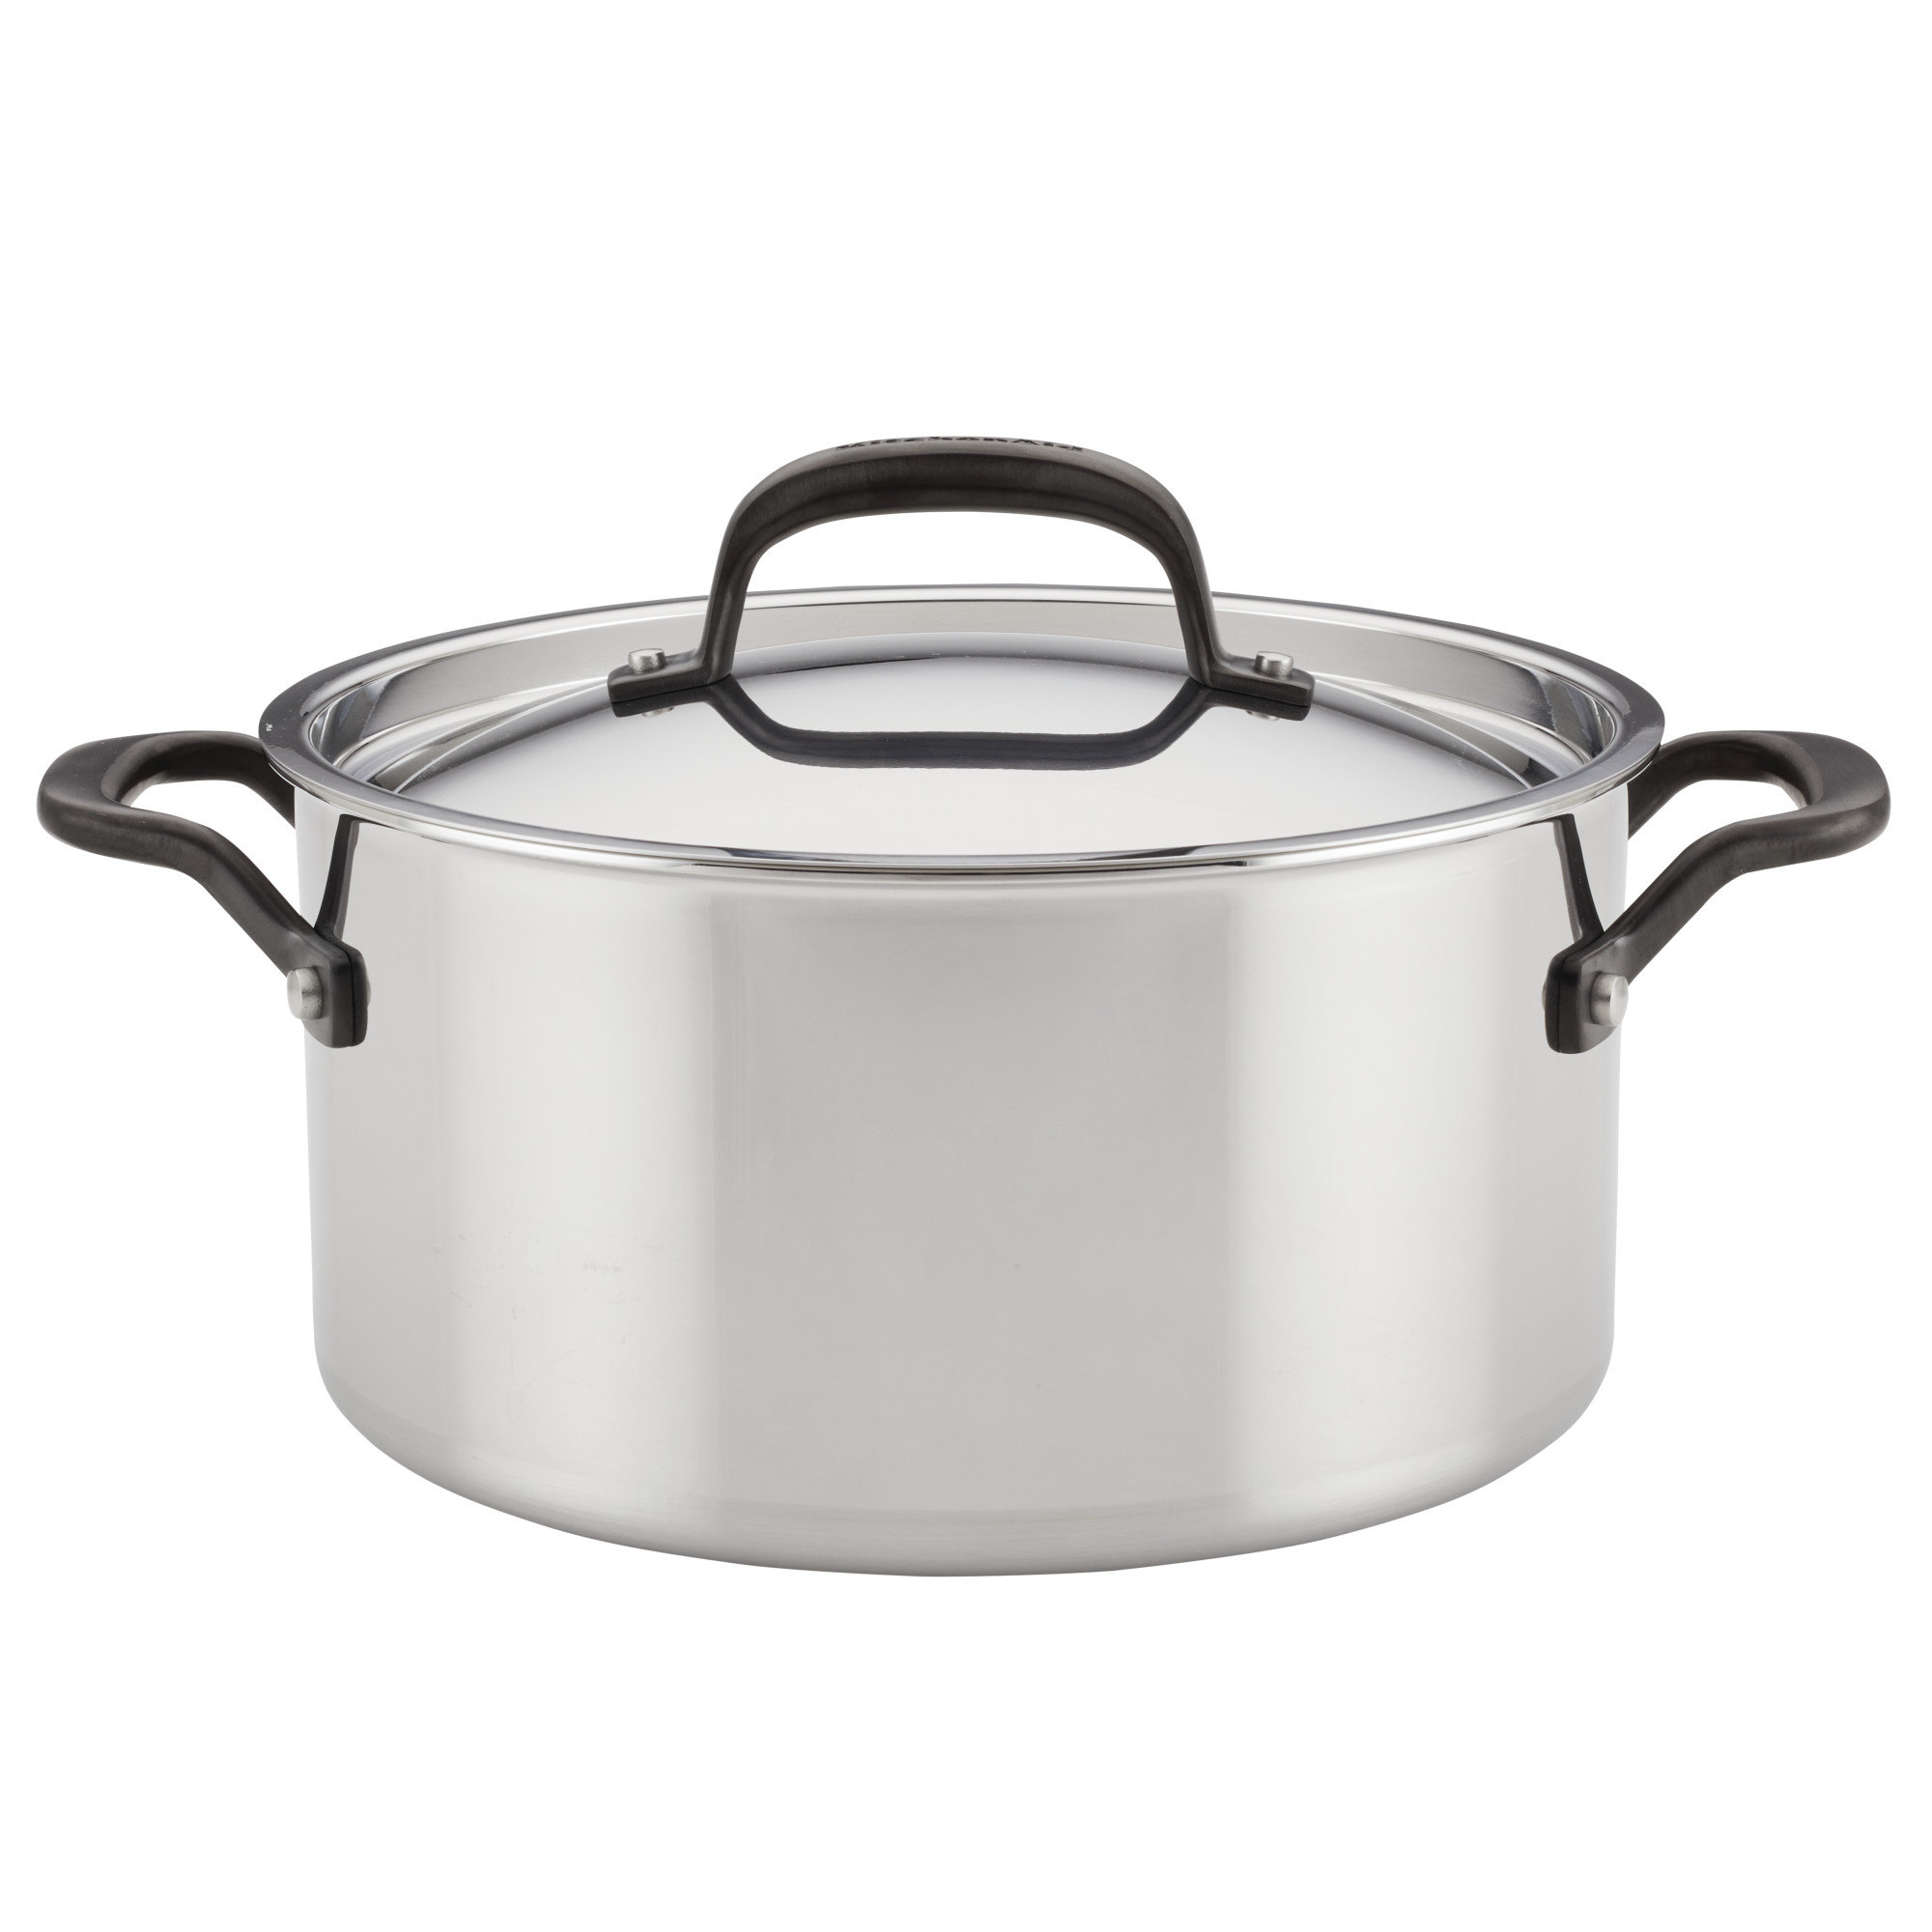 KitchenAid 5-Ply Clad Stainless Steel Stockpot with Lid, 6-Quart